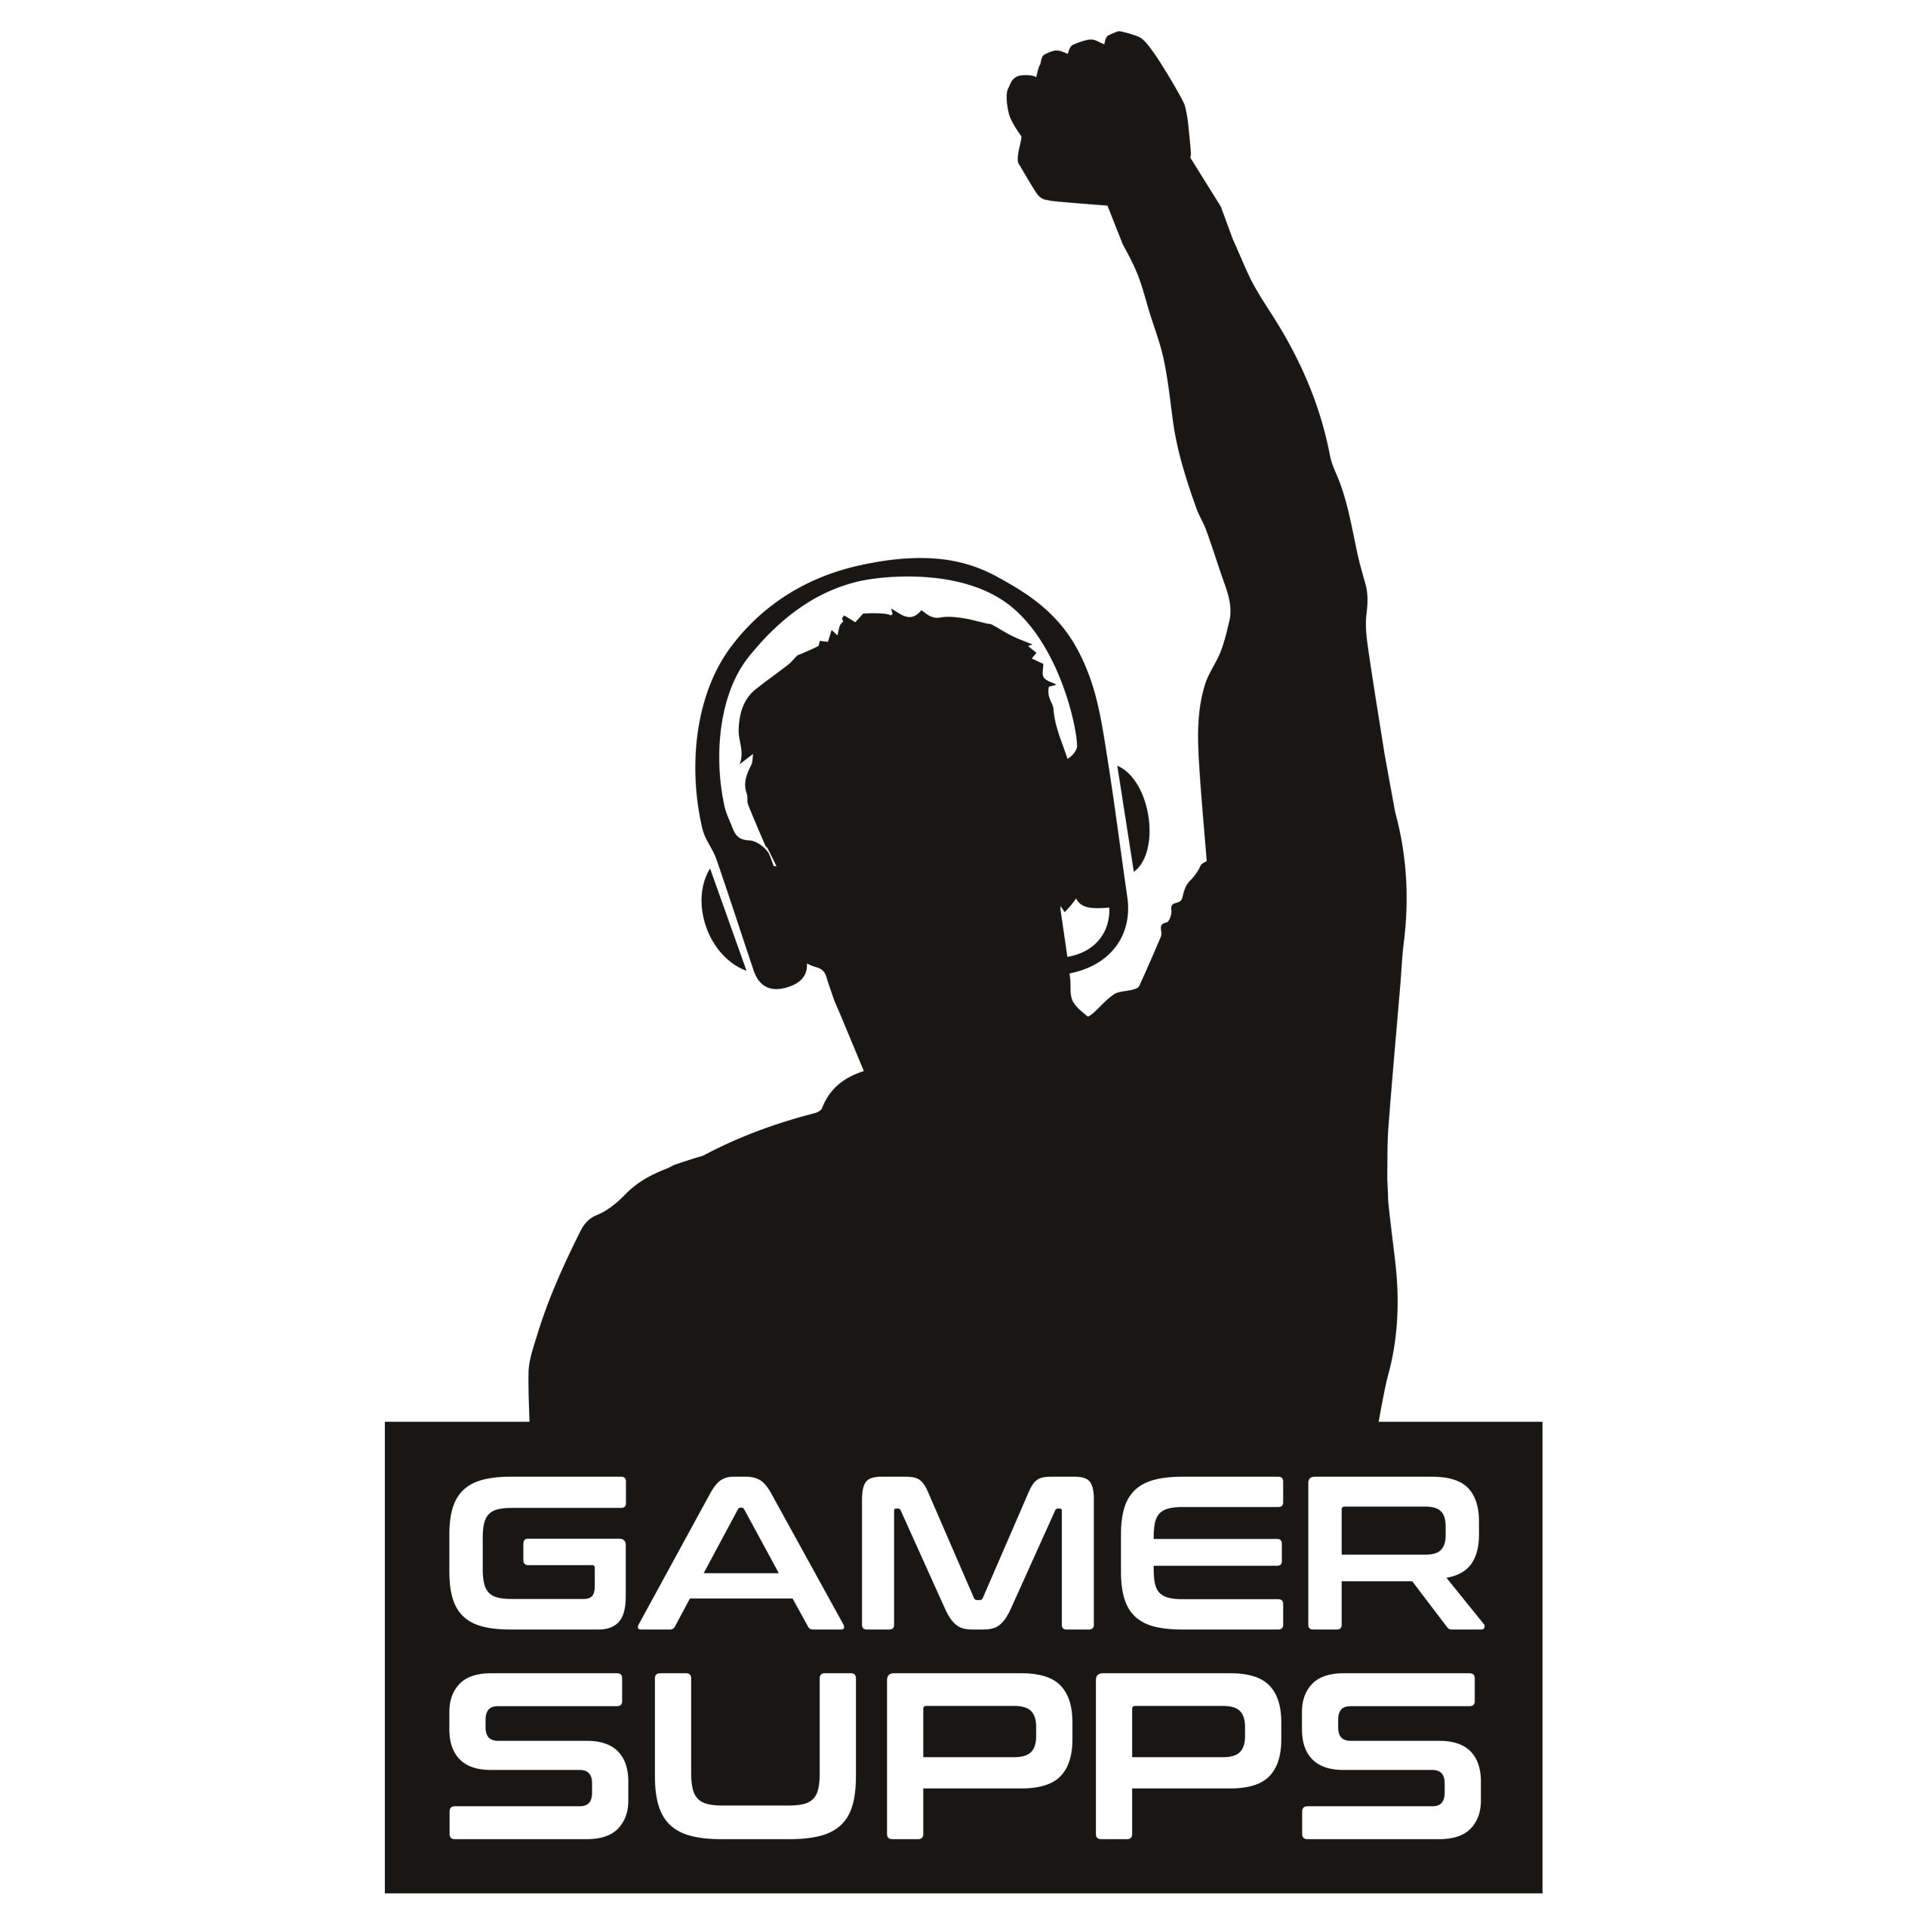 Who owns GamerSupps? The company’s ownership and controversies